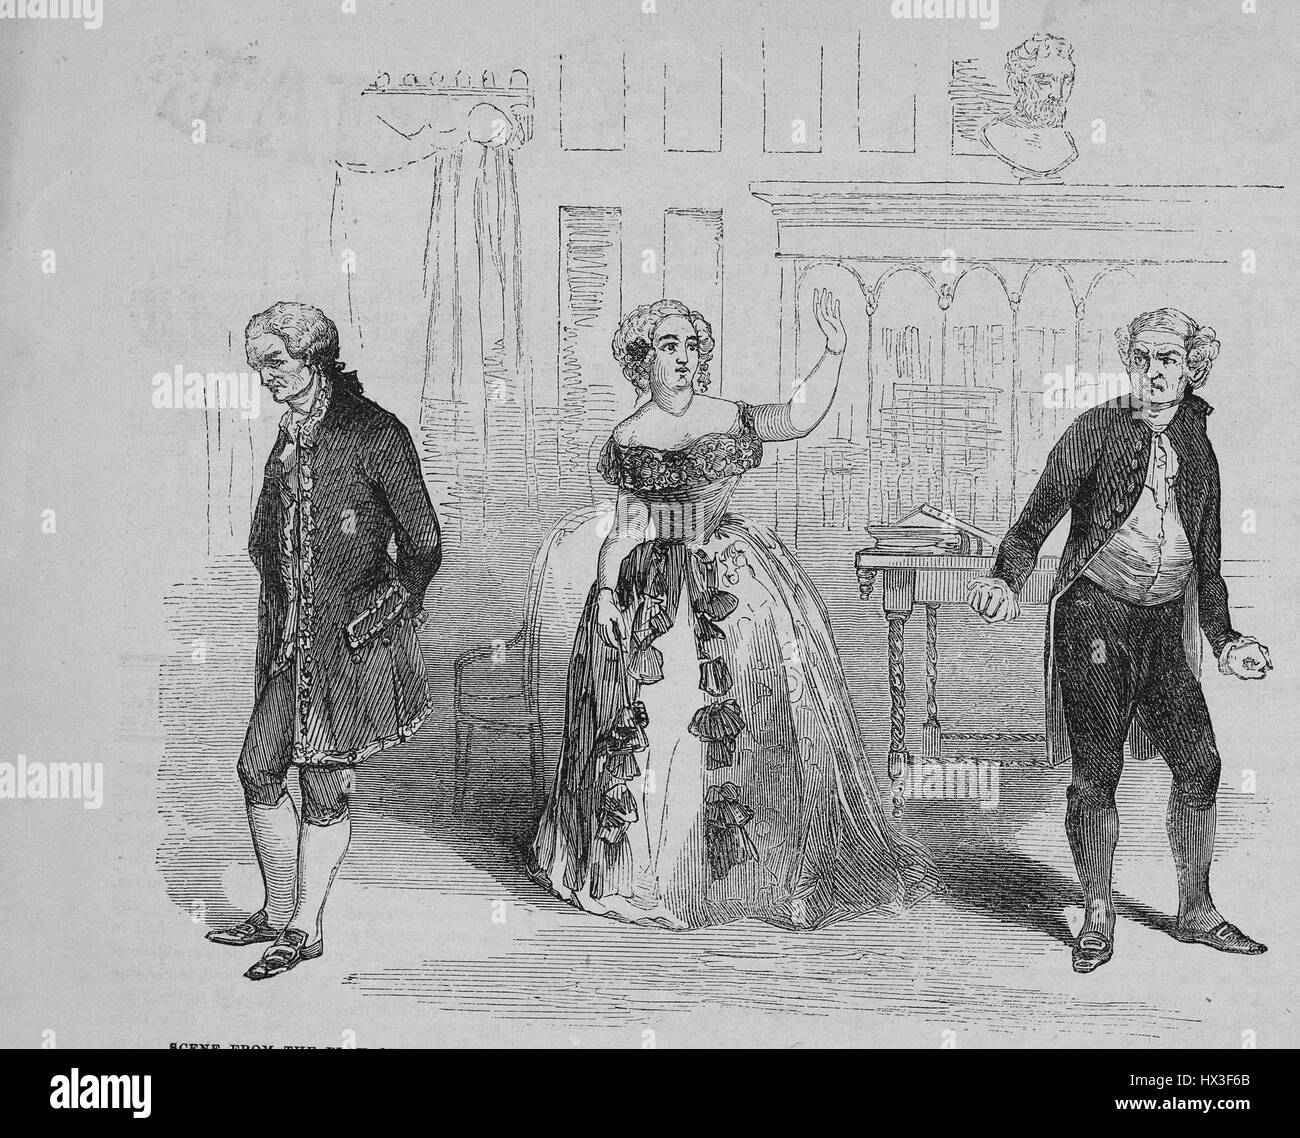 Scene from the play The School for Scandal, showing Catherine N. Sinclair as Lady Teazler, 1853. From the New York Public Library. Stock Photo